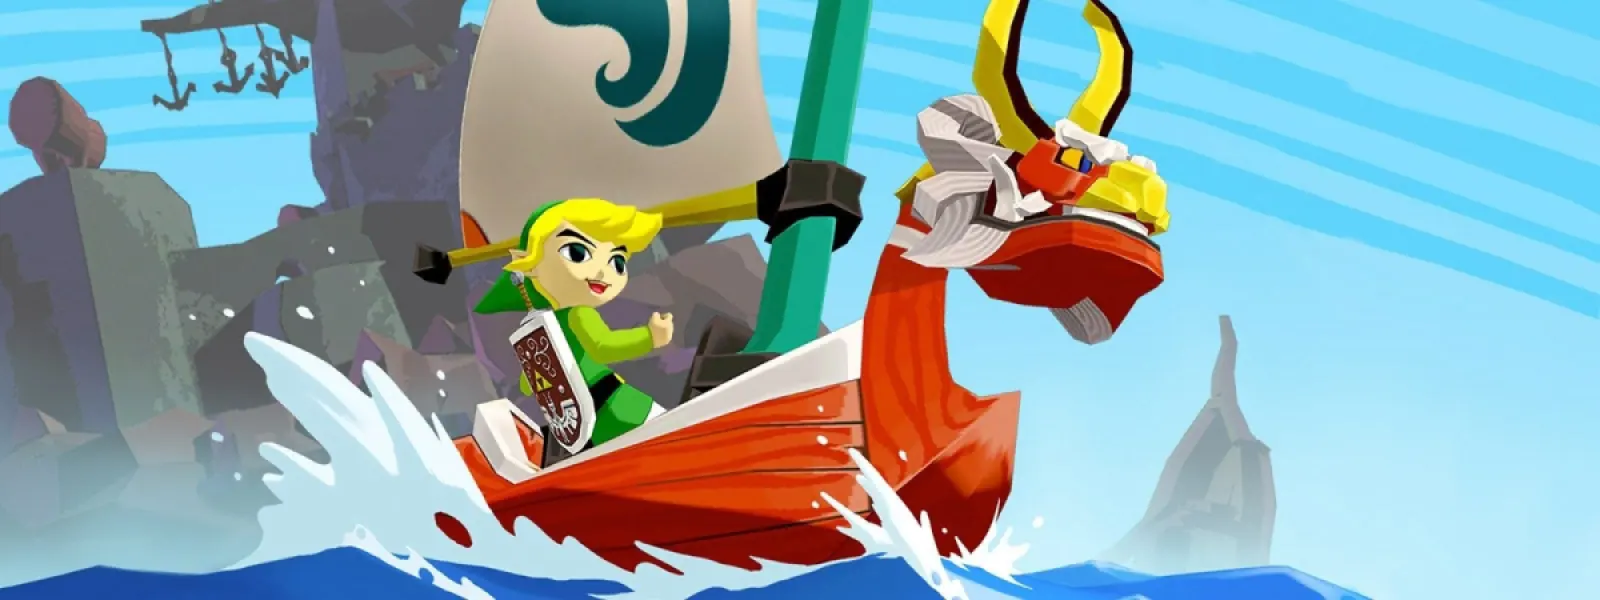 Link rides a red dragon boat across the ocean in 'The Legend of Zelda: The Wind Waker'